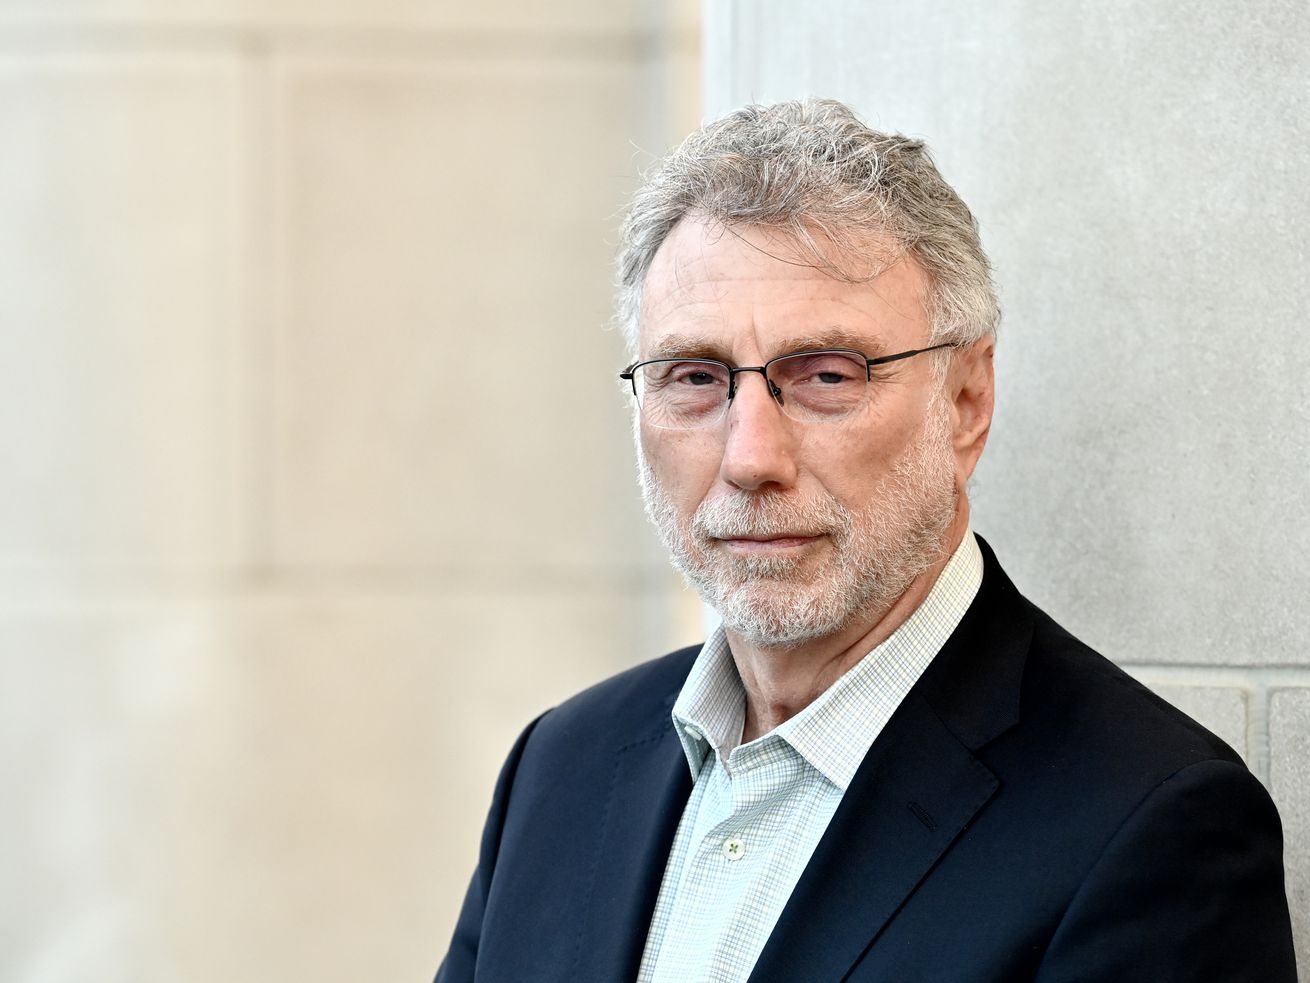 Marty Baron on truth, democracy, and the press in an age of distrust